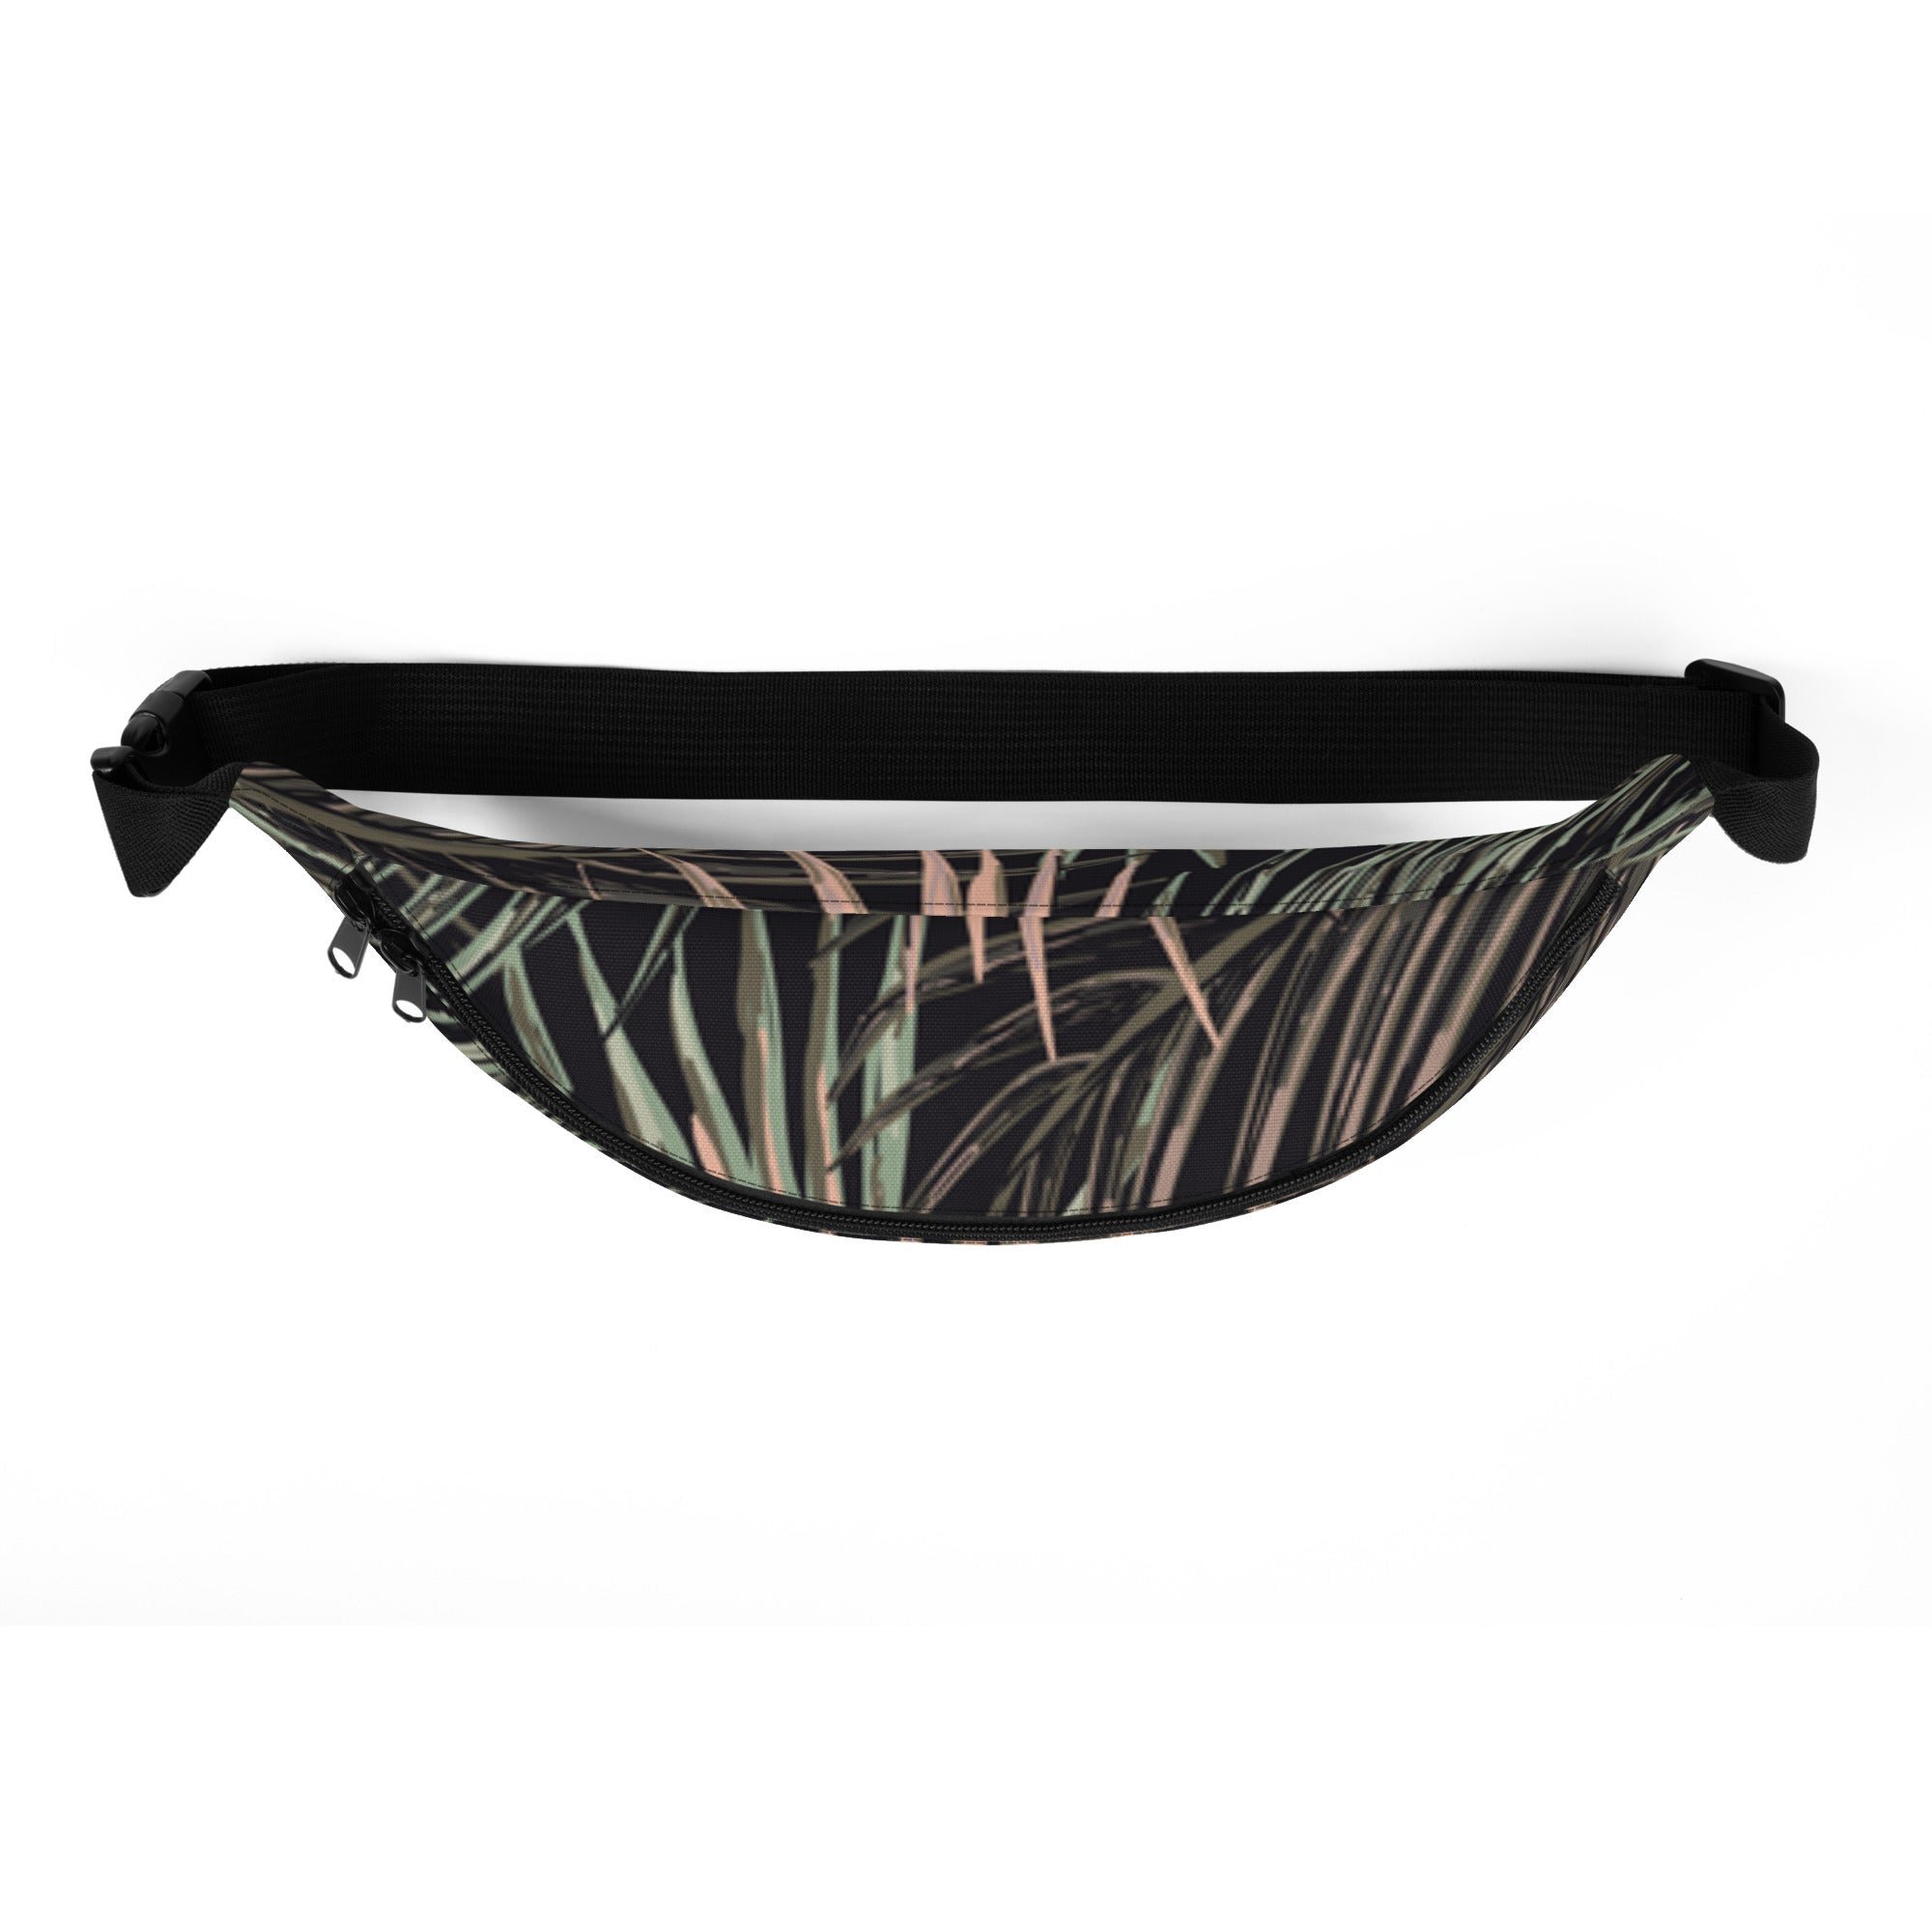 All Over Leaf Printed Fanny Pack